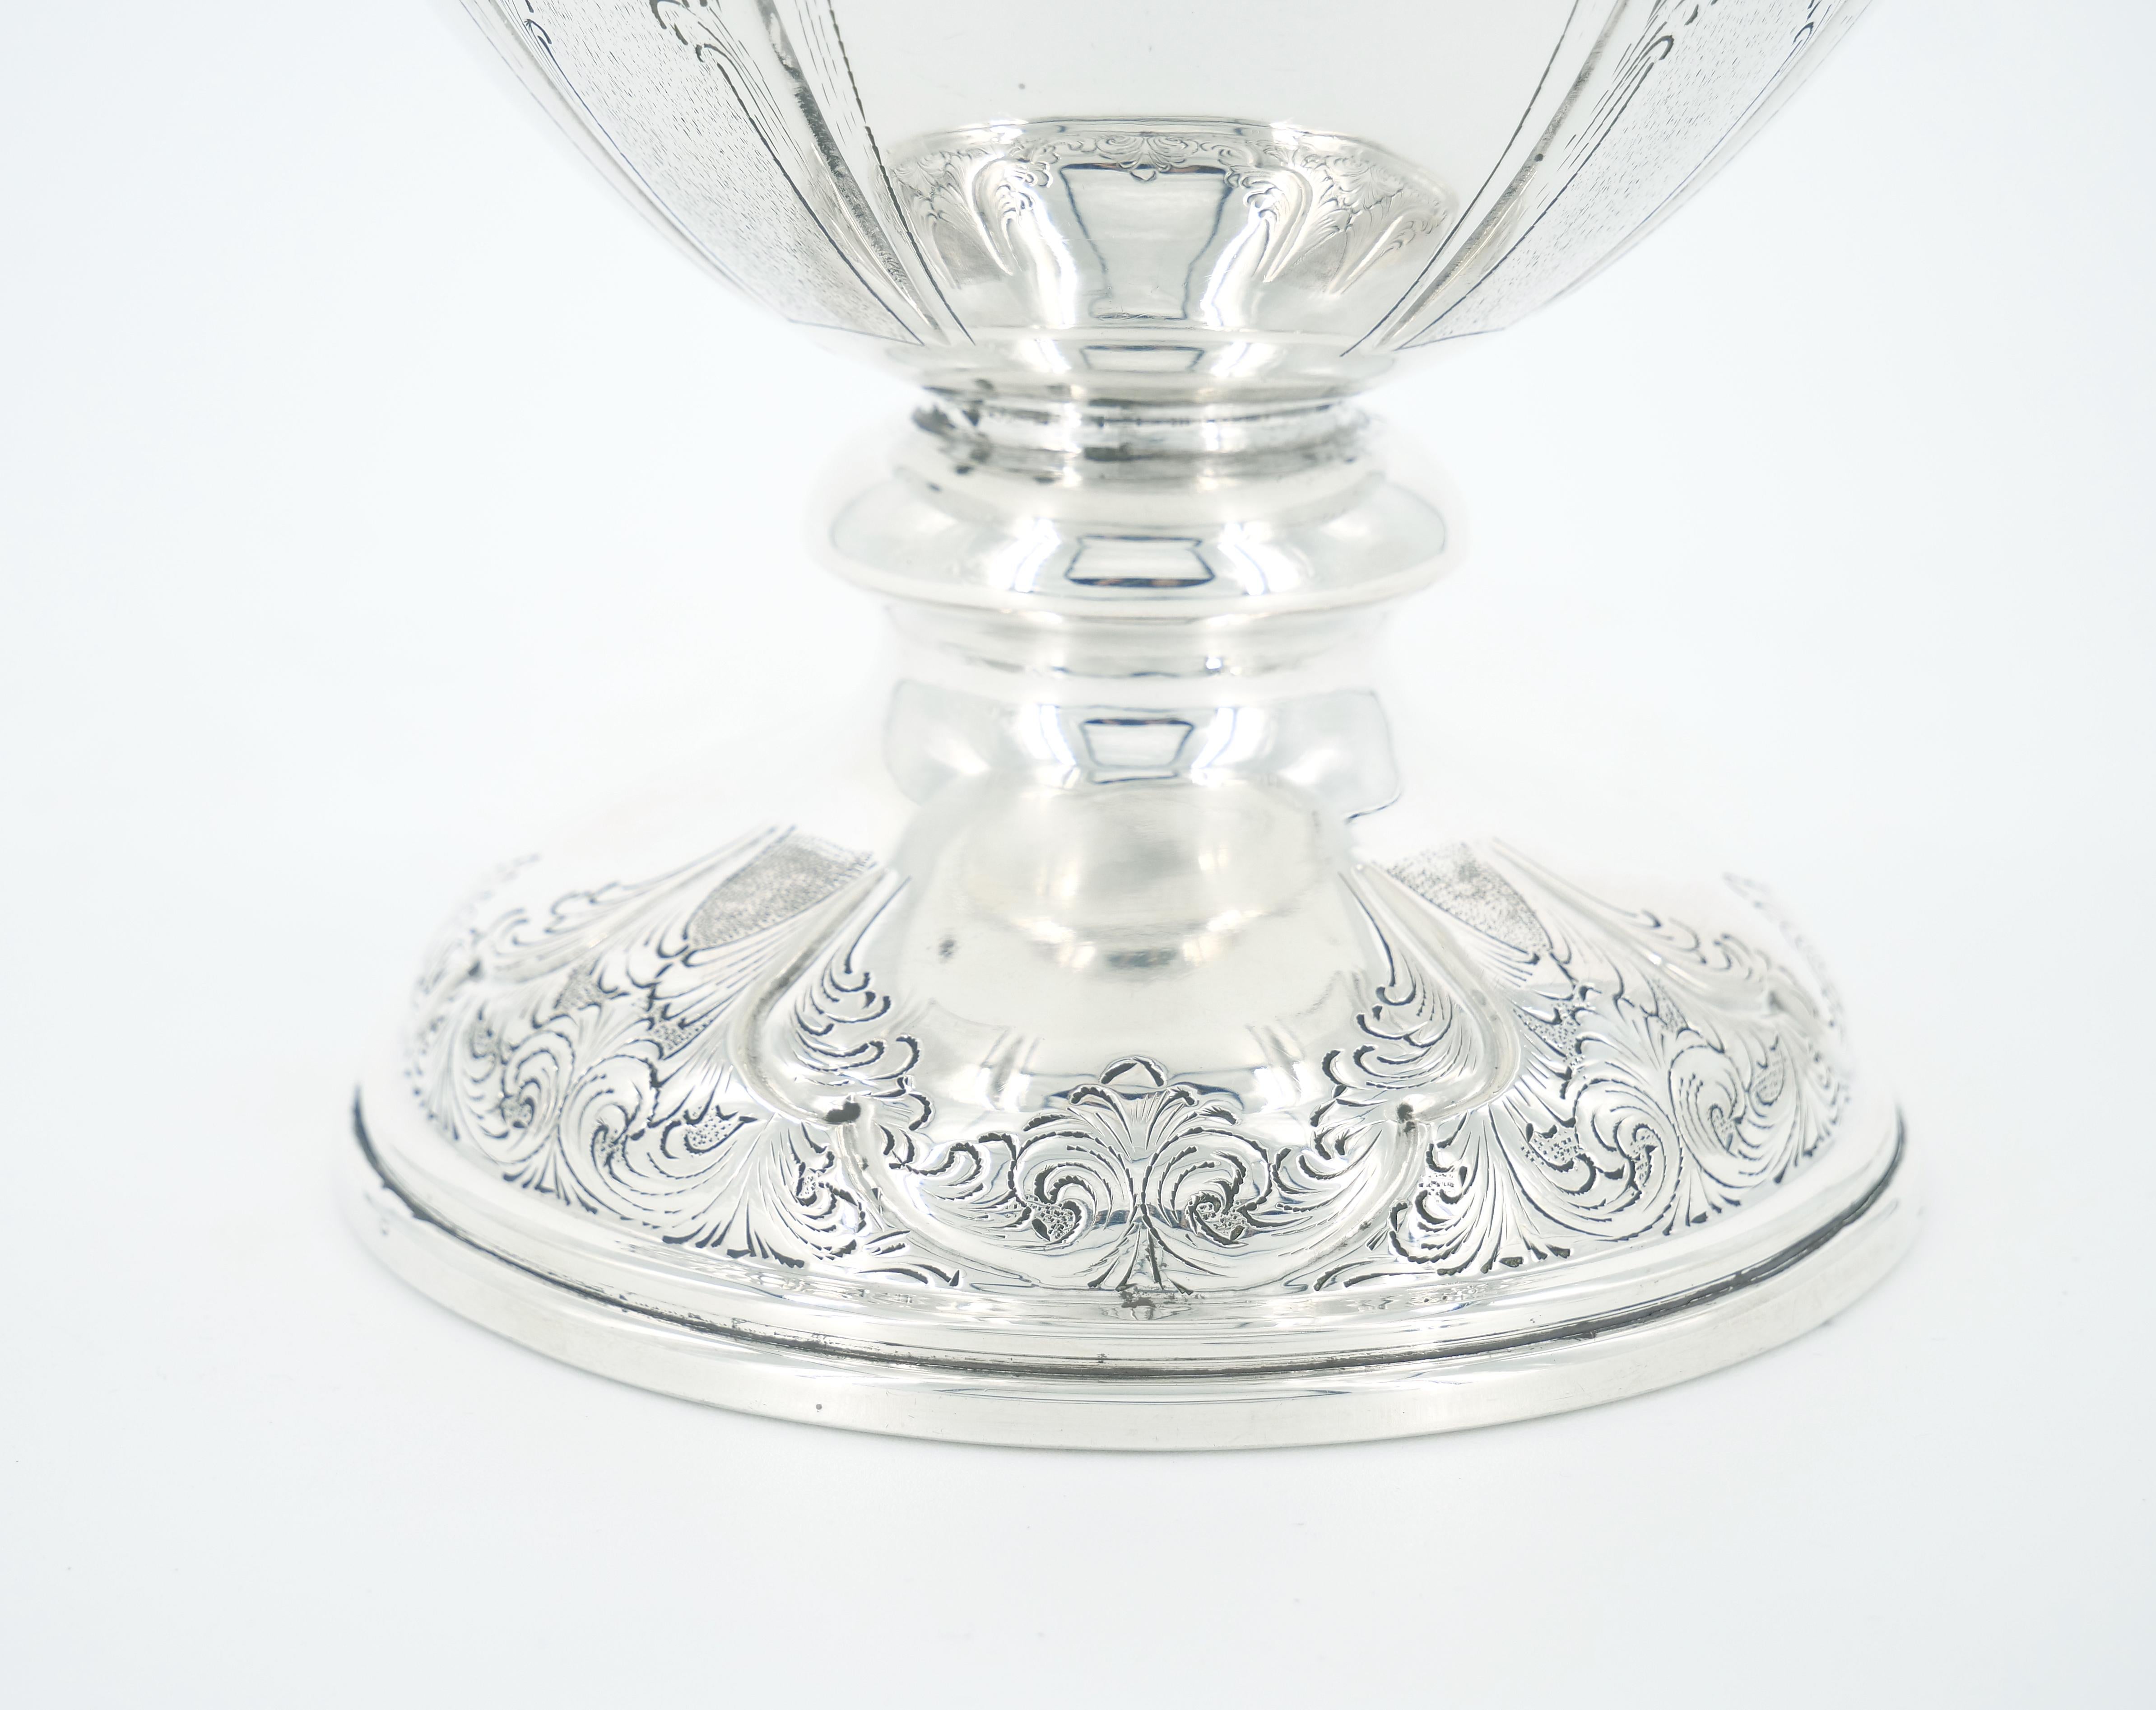 Italian Sterling Silver / Precious Stone One Handled Decorative Vase / Piece For Sale 1